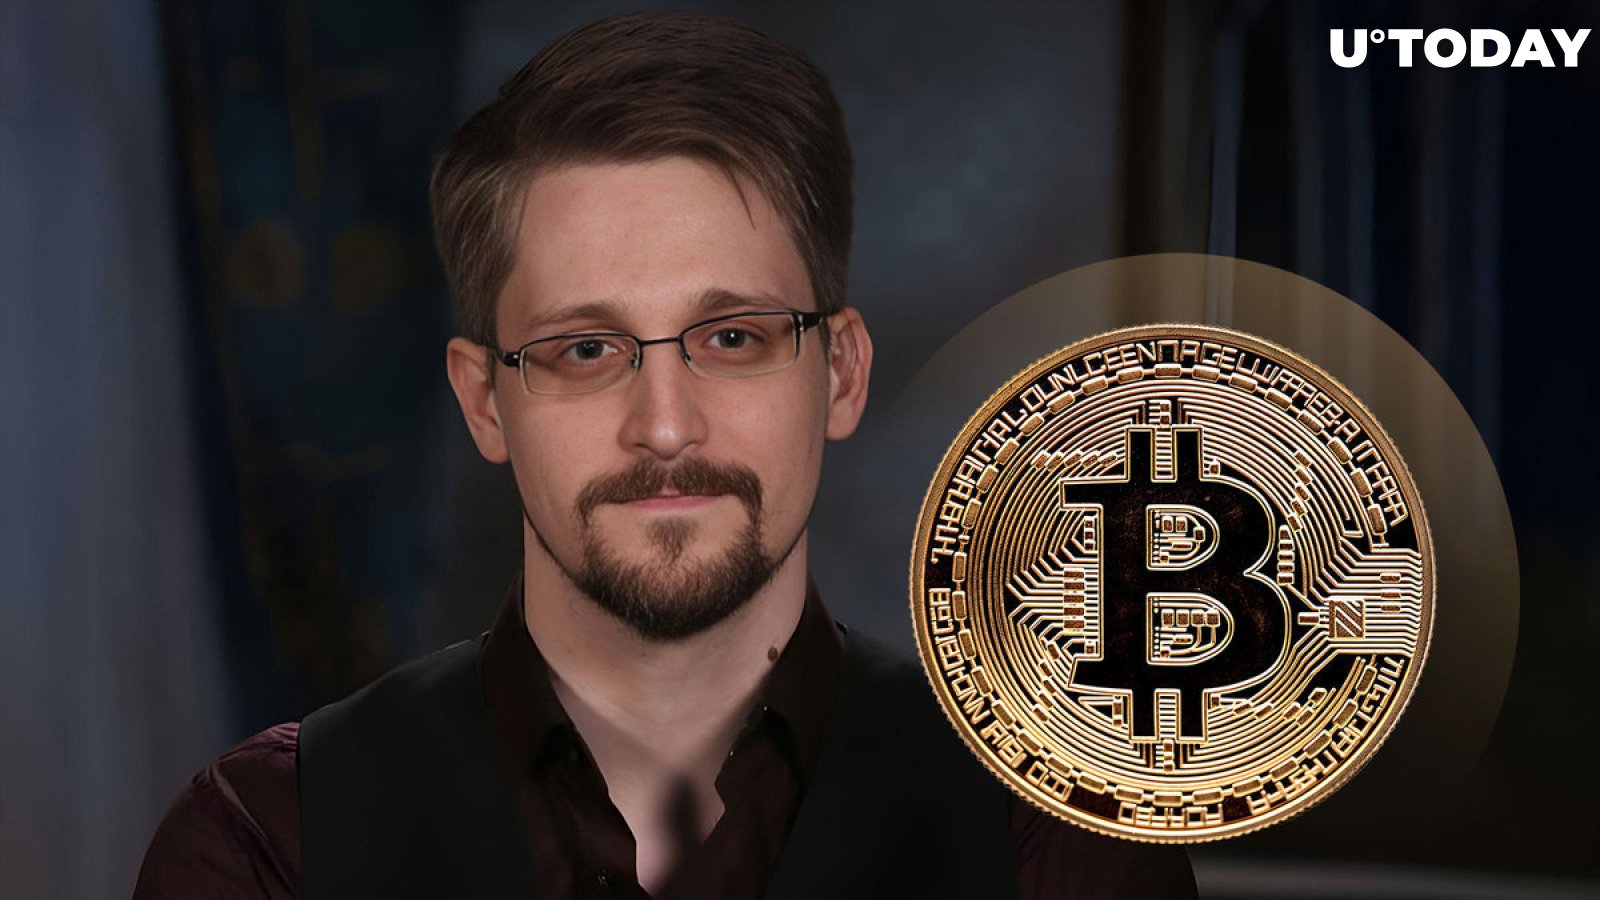 Edward Snowden issues crucial warning about Bitcoin: 'The clock is ticking'